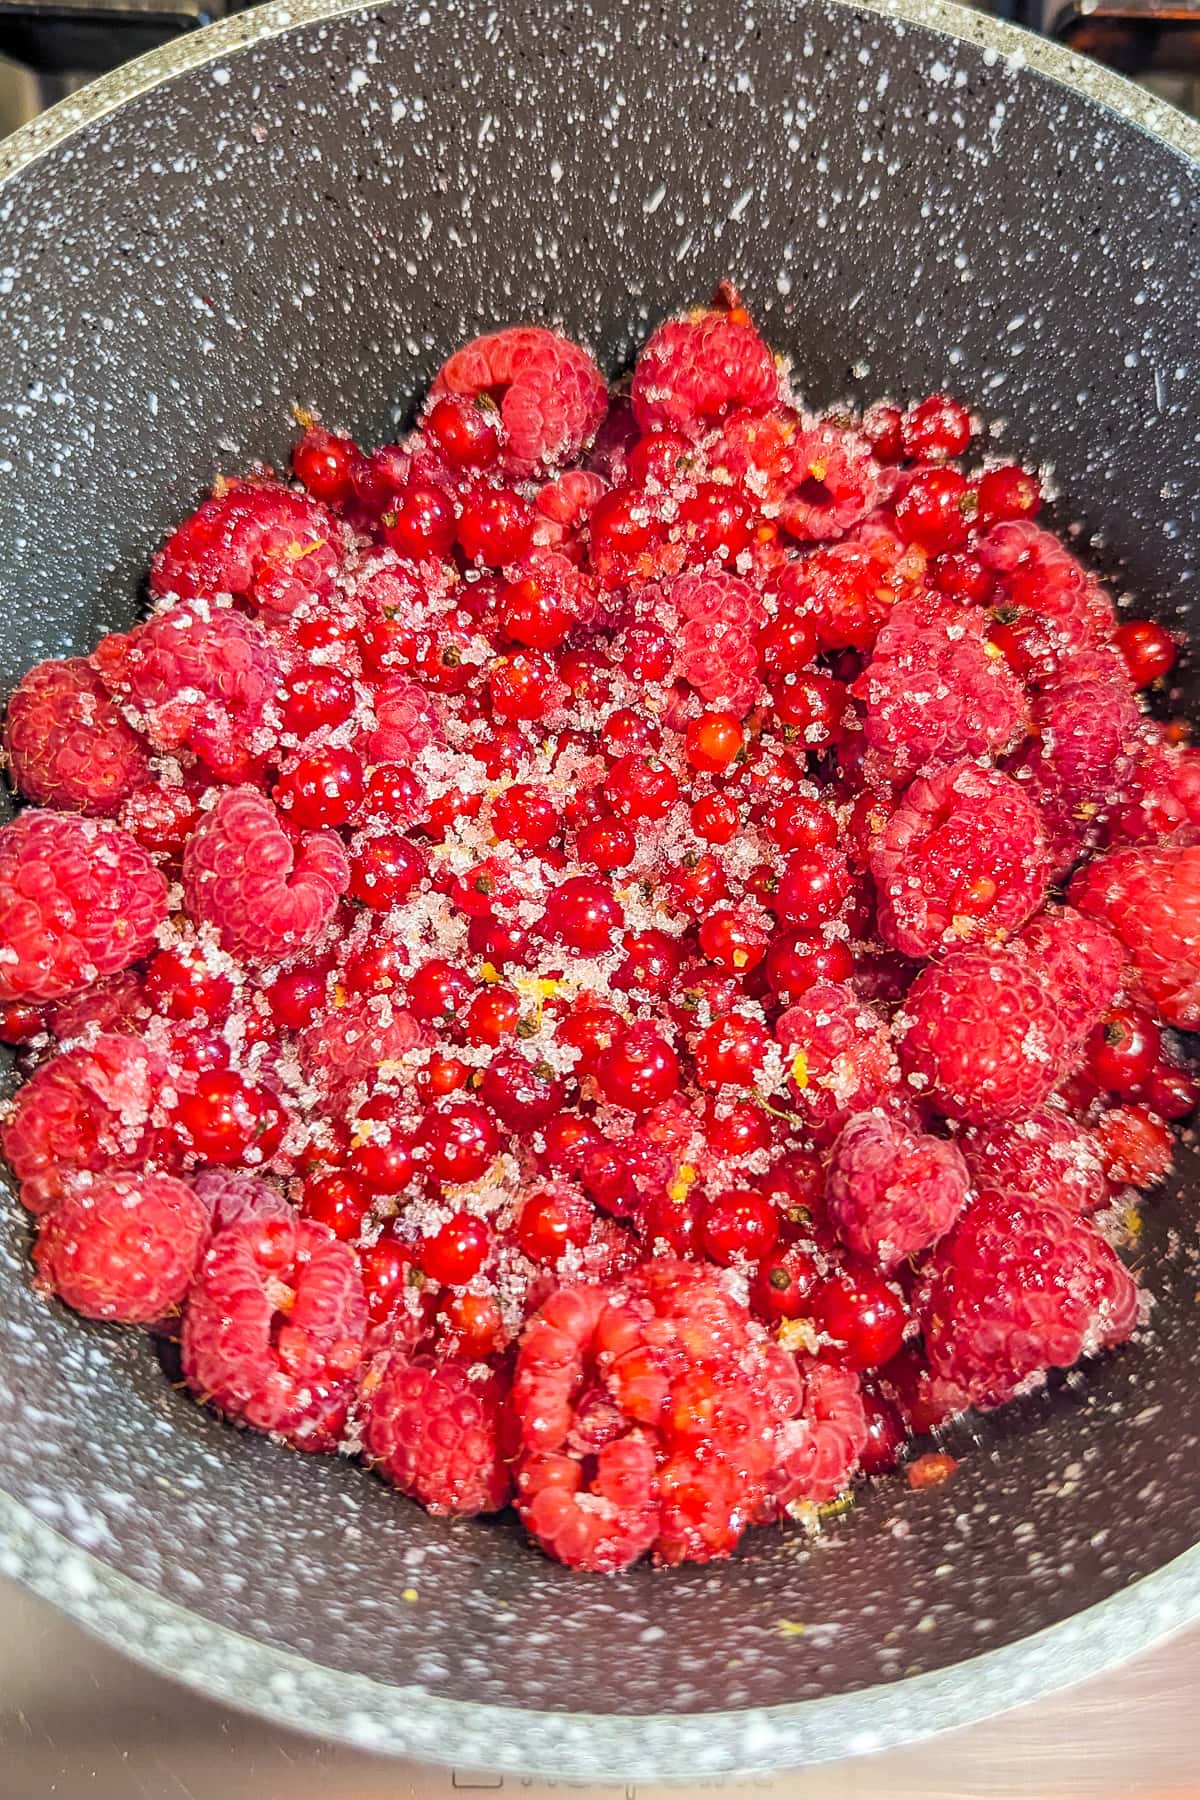 Raspberries with Red currants and lemon sugar in a saucepan.